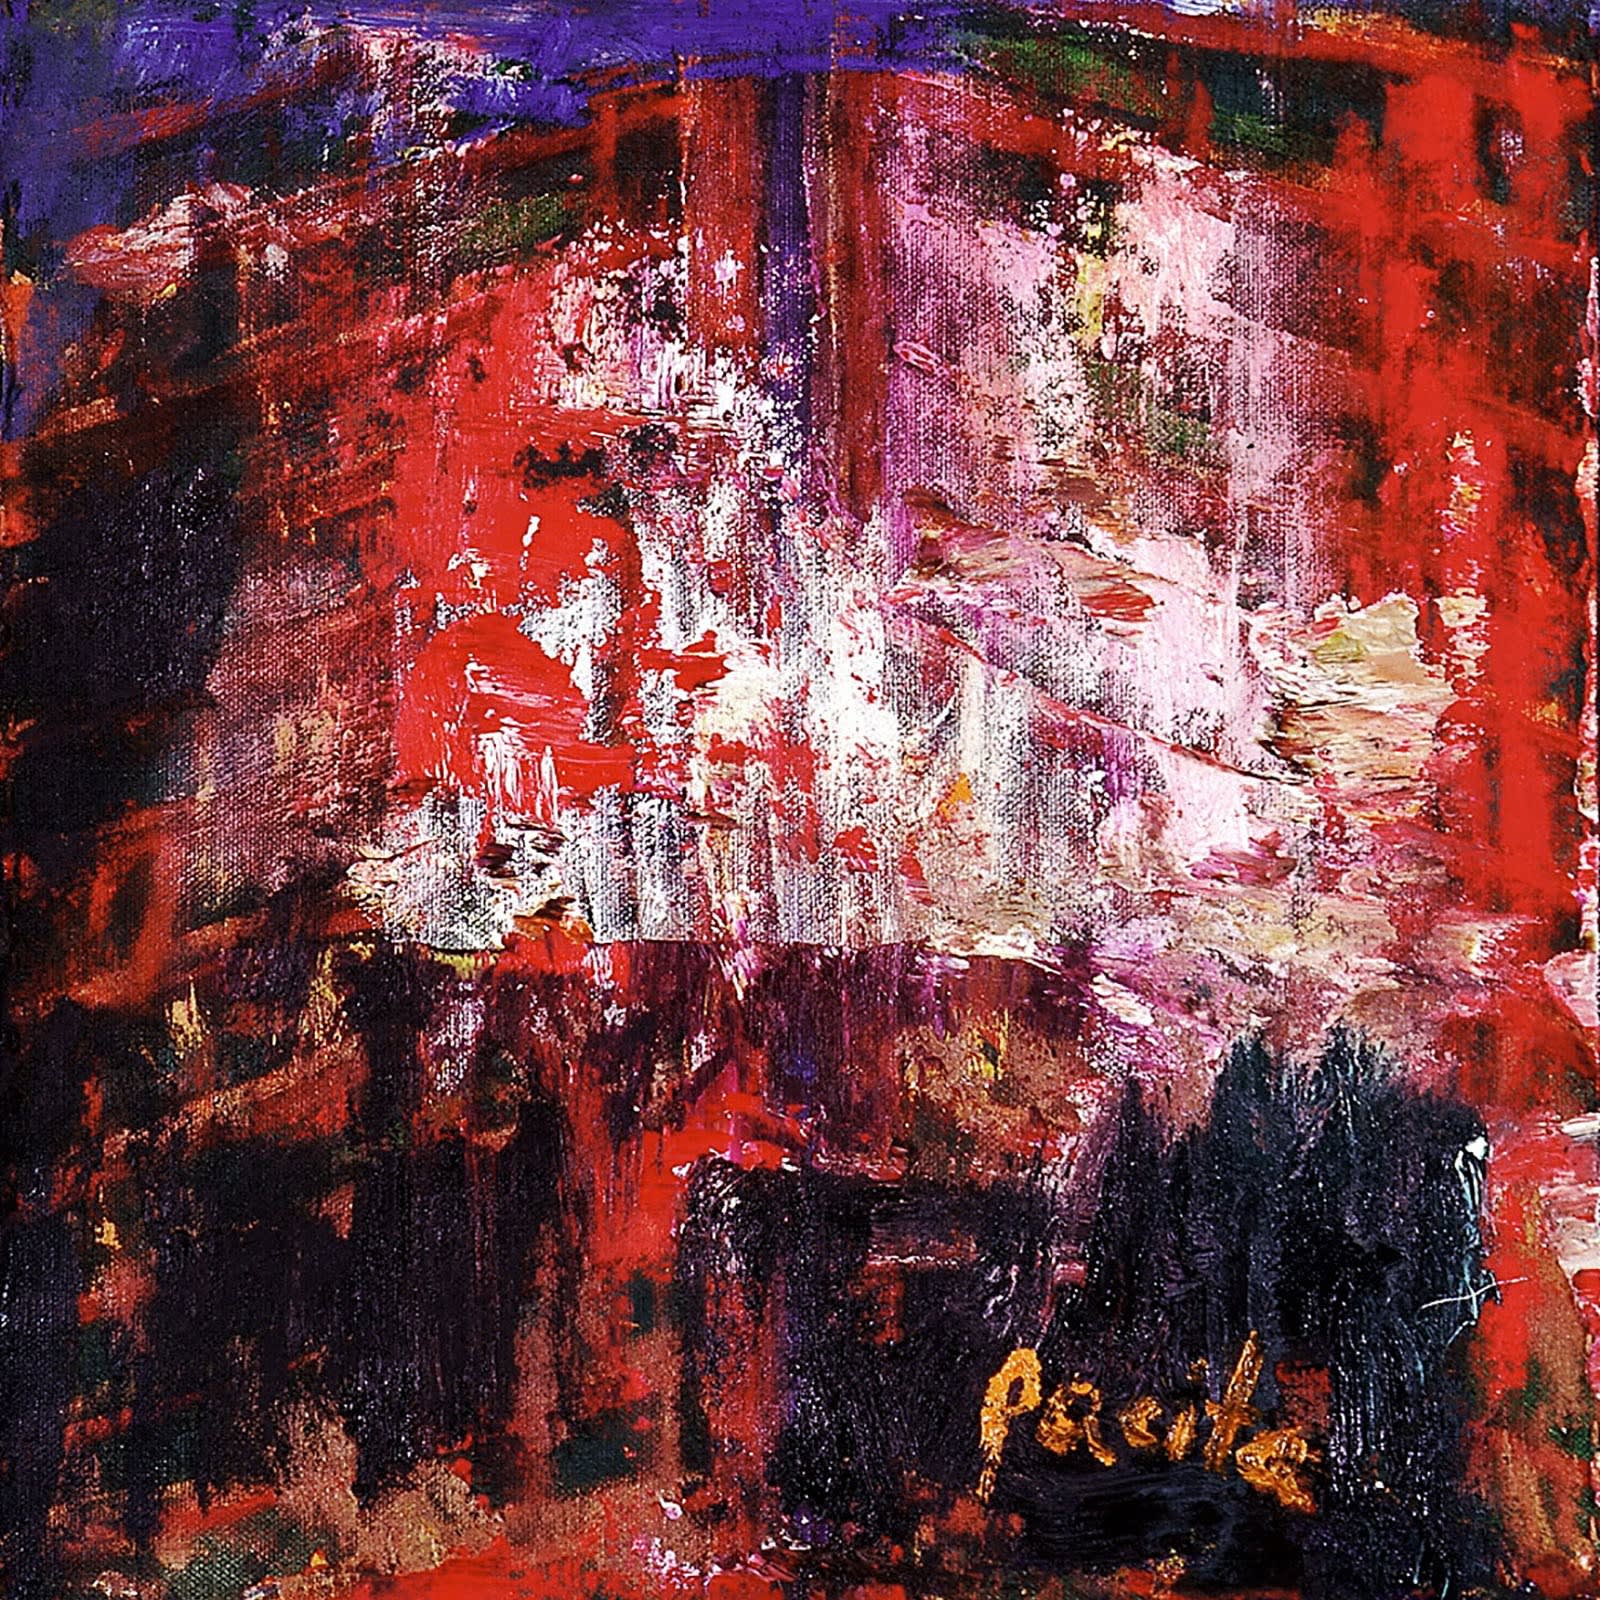 Entrance to al-Haima, 1998 Oil, painted canvas stitched on canvas 12 x 12 in 30 x 30 cm